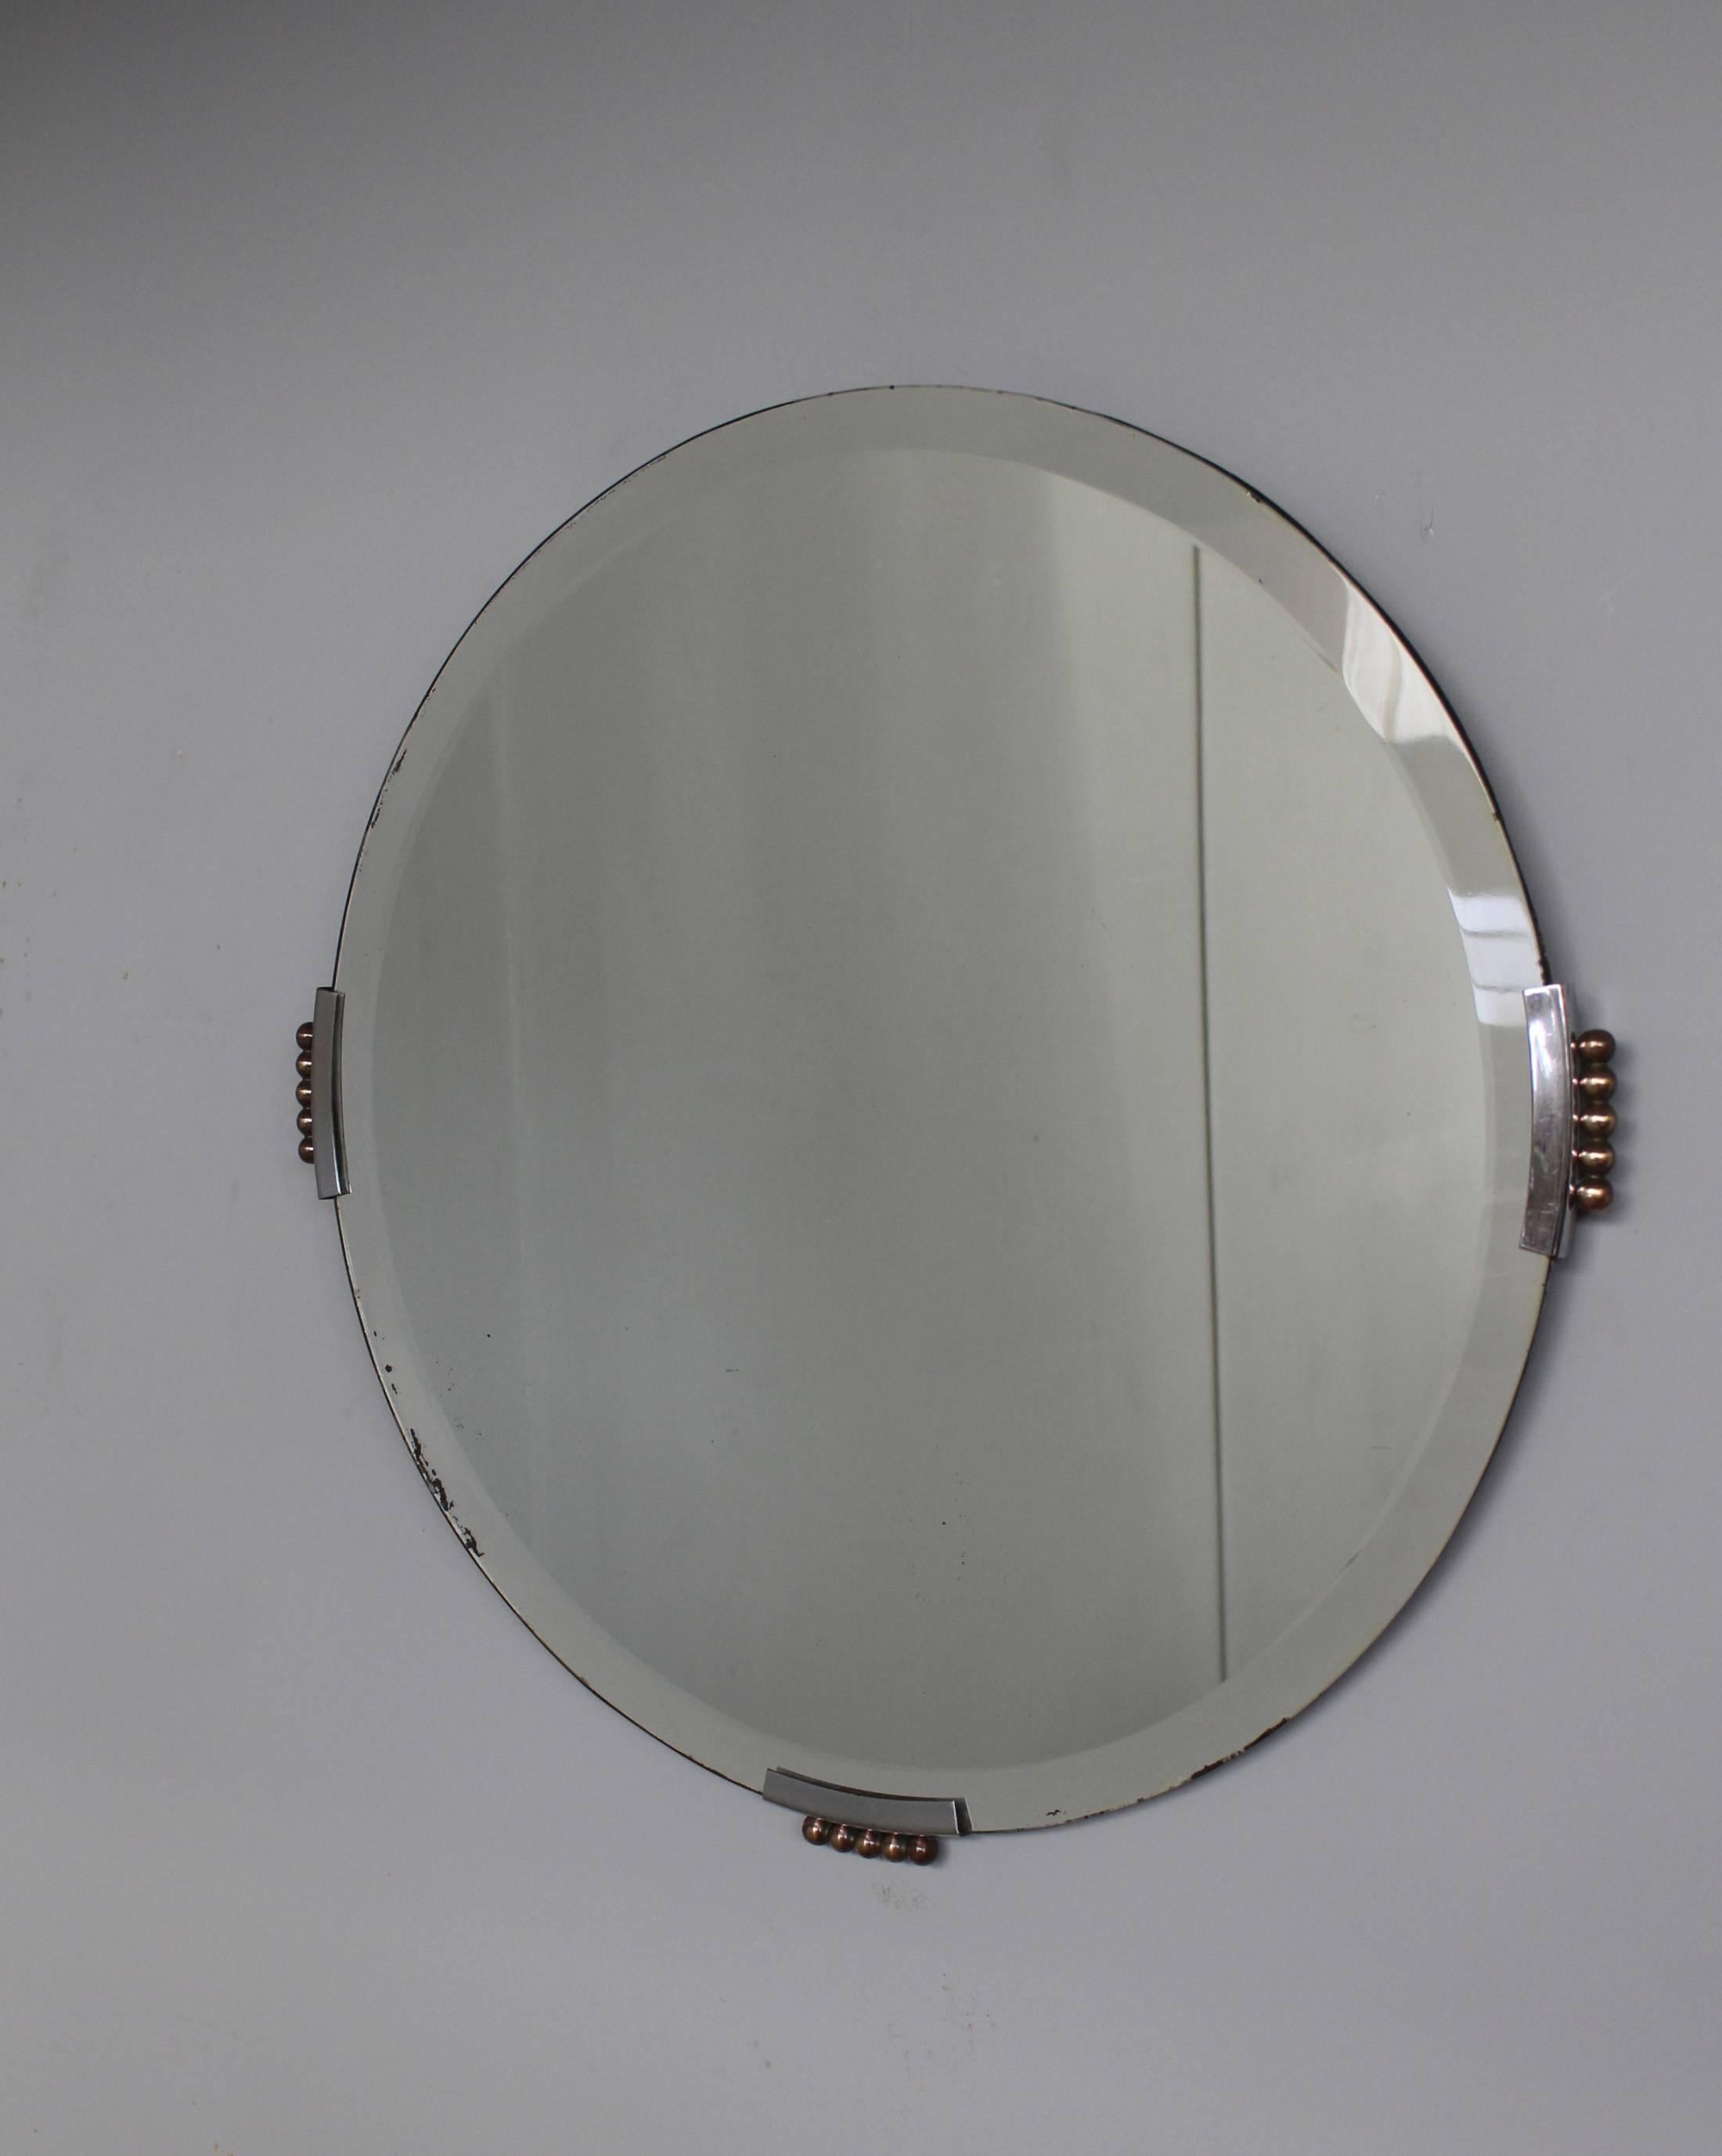 Fine French Art Deco round mirror with chrome and bronze details.
Maximum width is 28